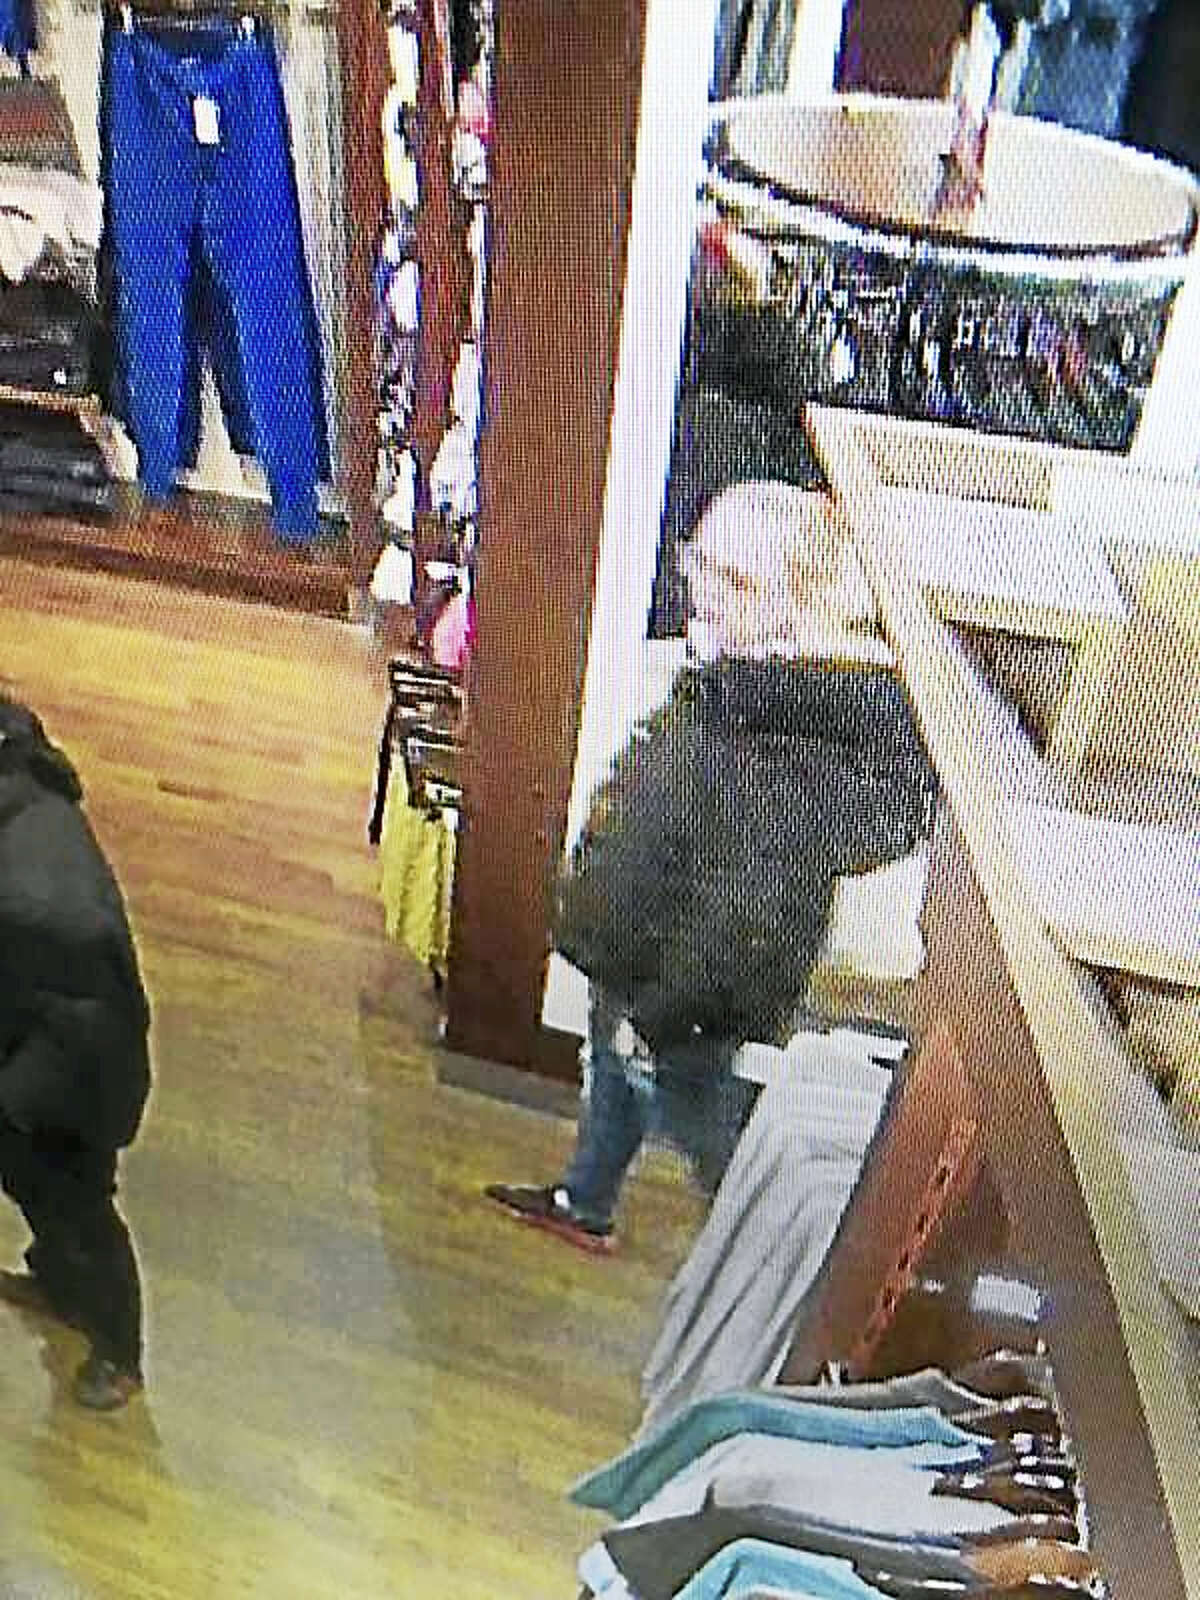 Clinton police seek the public’s help in identifying four individuals suspected of shoplifting at Clinton Crossing Premium Outlets on March 26, 2017. (Photo courtesy of Clinton Police Department)